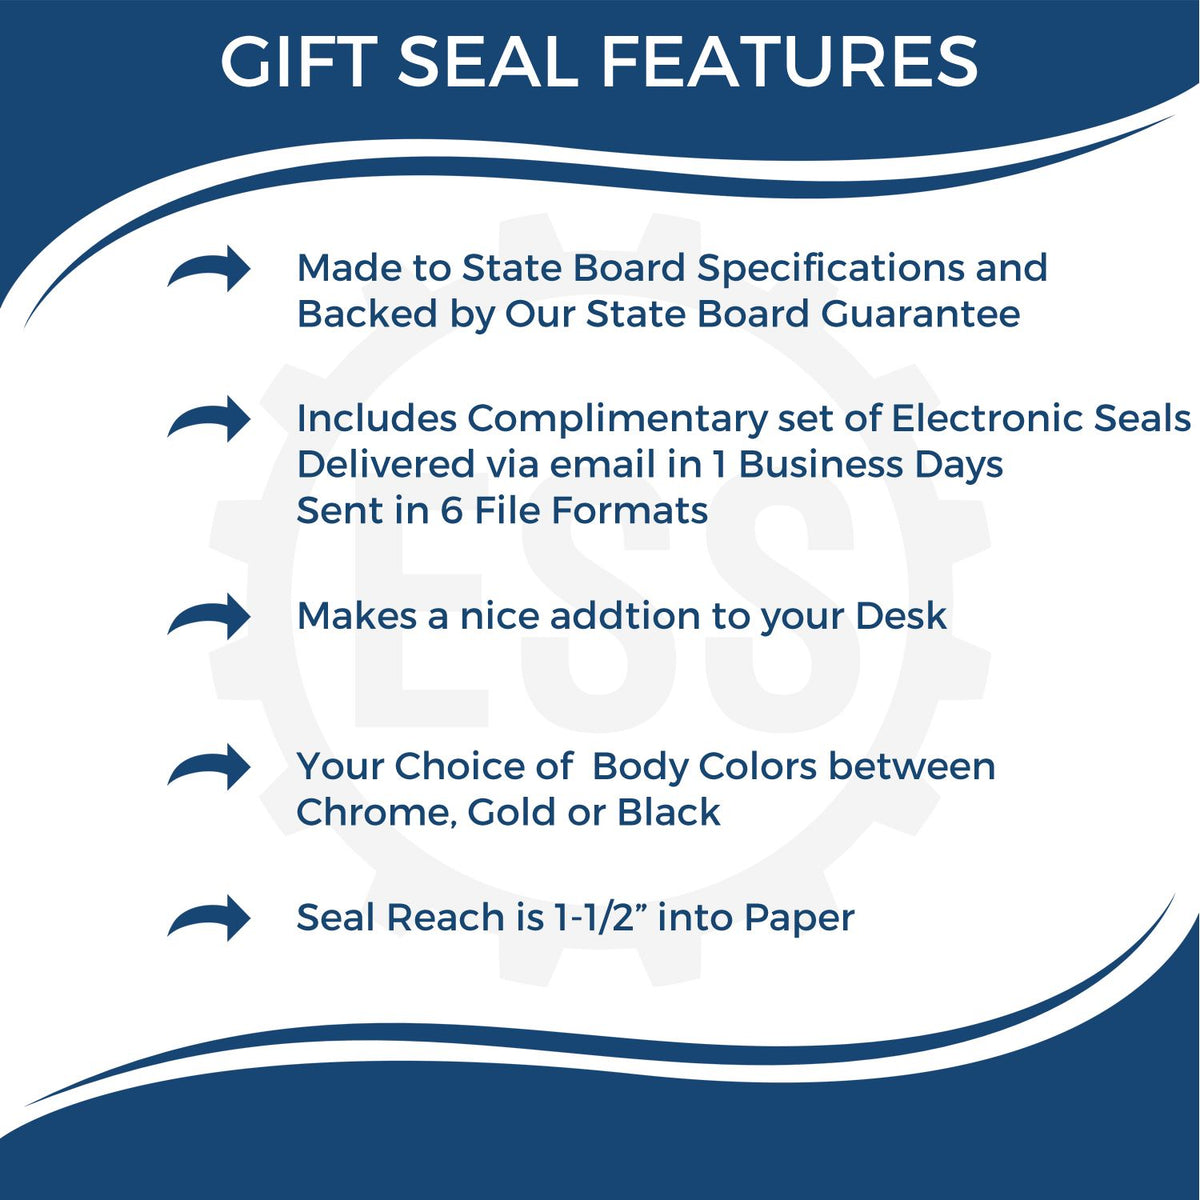 A picture of an infographic highlighting the selling points for the Gift Hawaii Geologist Seal